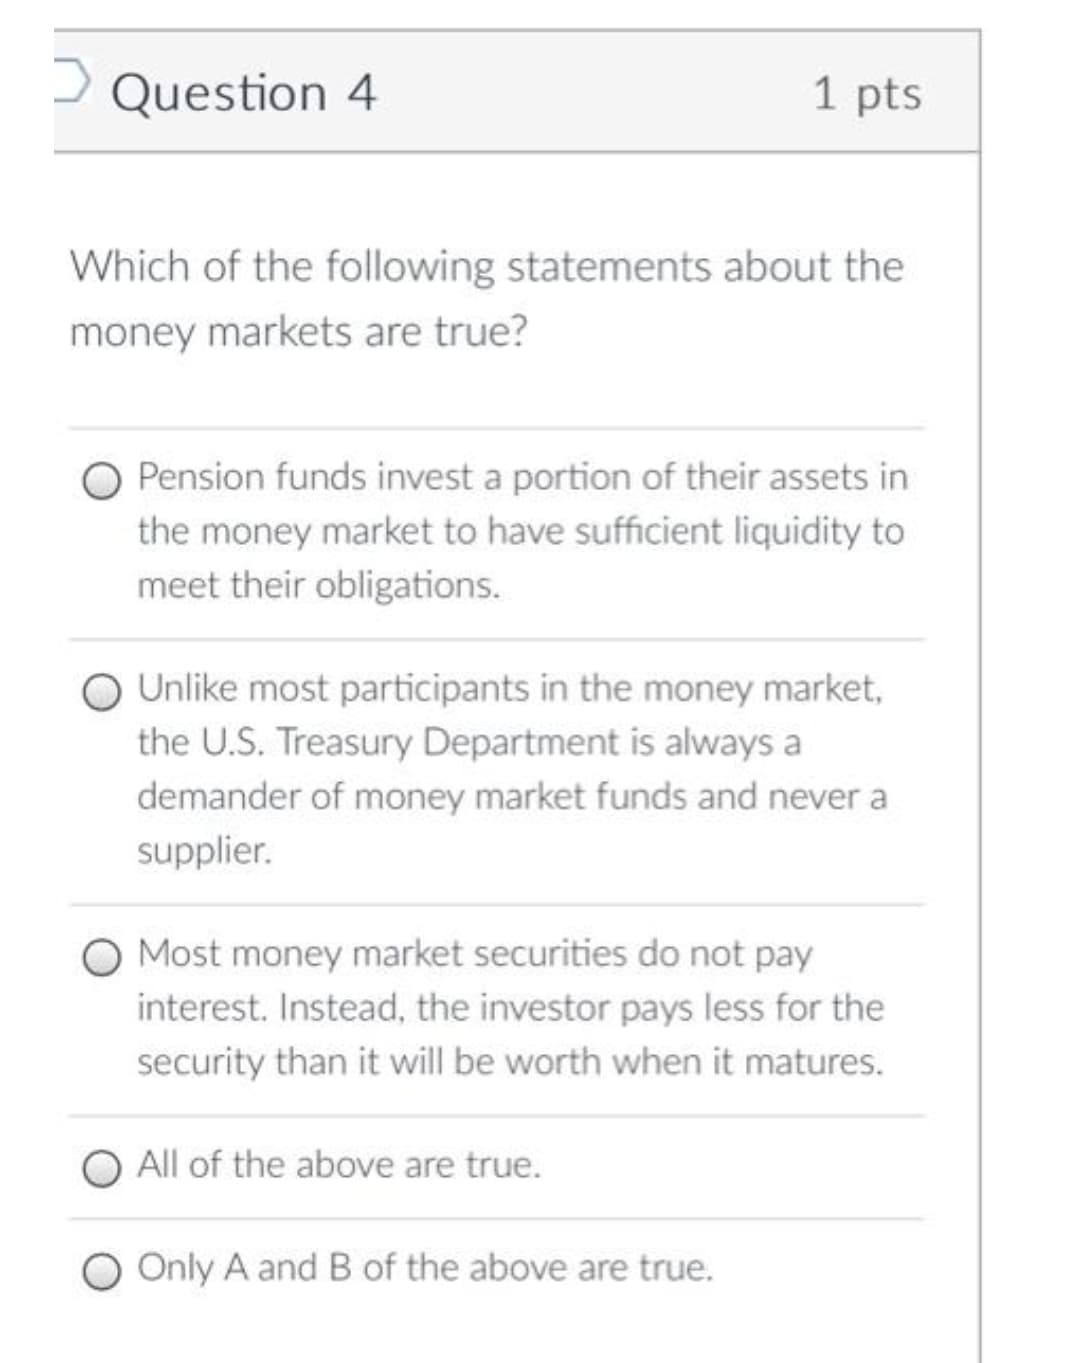 D Question 4
1 pts
Which of the following statements about the
money markets are true?
Pension funds invest a portion of their assets in
the money market to have sufficient liquidity to
meet their obligations.
Unlike most participants in the money market,
the U.S. Treasury Department is always a
demander of money market funds and never a
supplier.
Most money market securities do not pay
interest. Instead, the investor pays less for the
security than it will be worth when it matures.
All of the above are true.
O Only A and B of the above are true.
